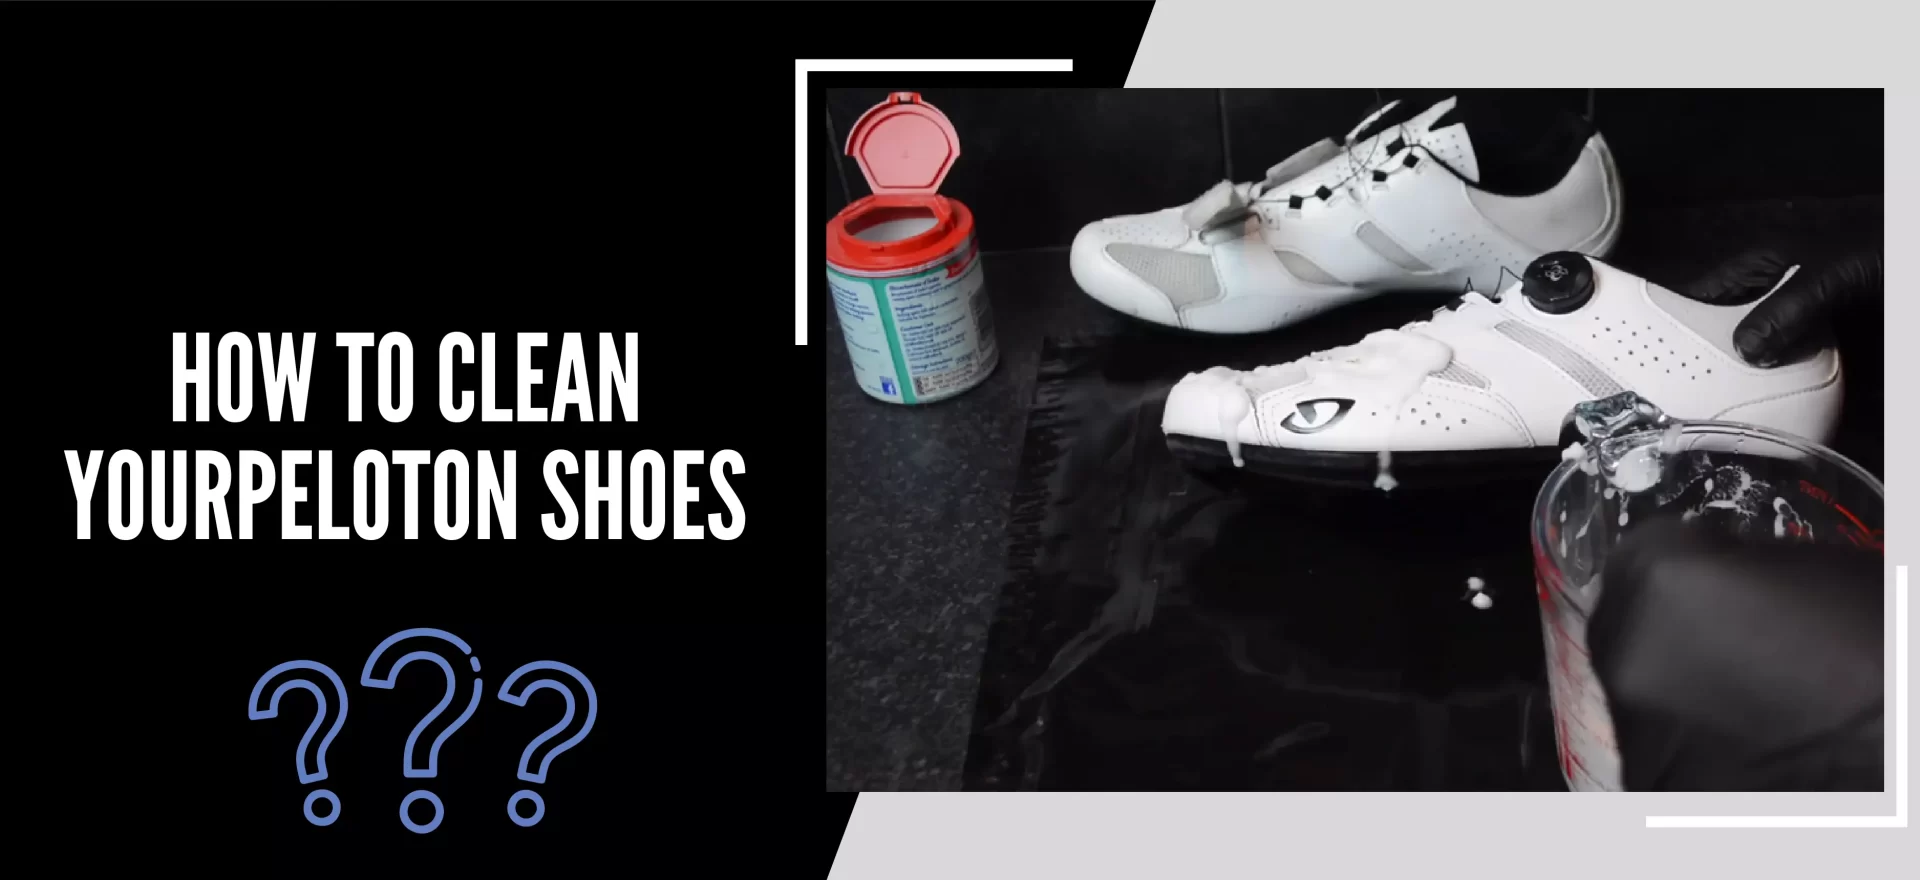 How To Clean Peloton Shoes